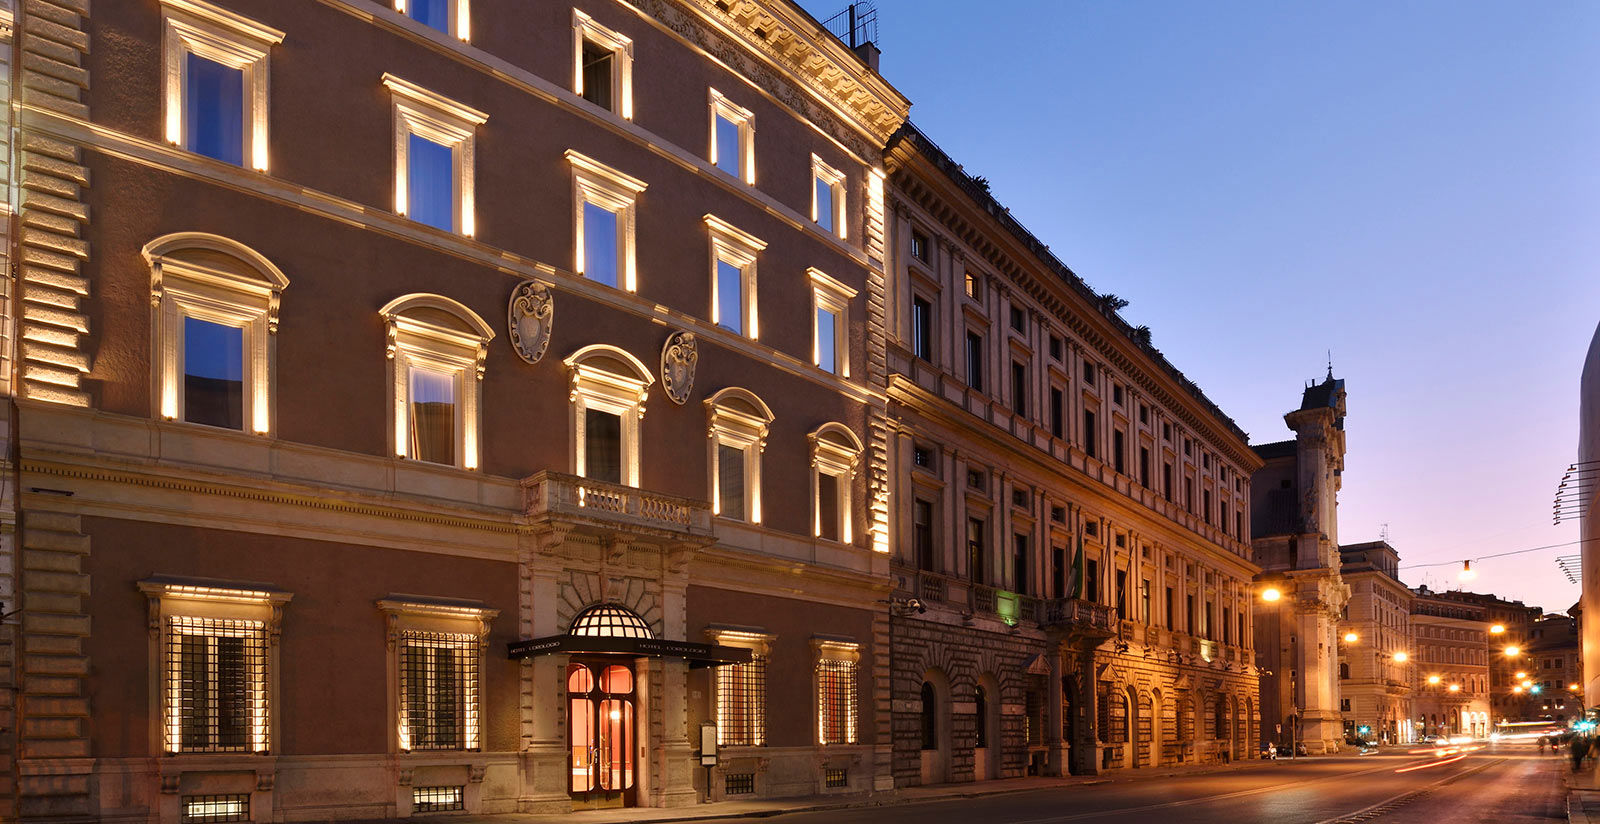 Choose Hotel L'Orologio Roma for holidays in Rome